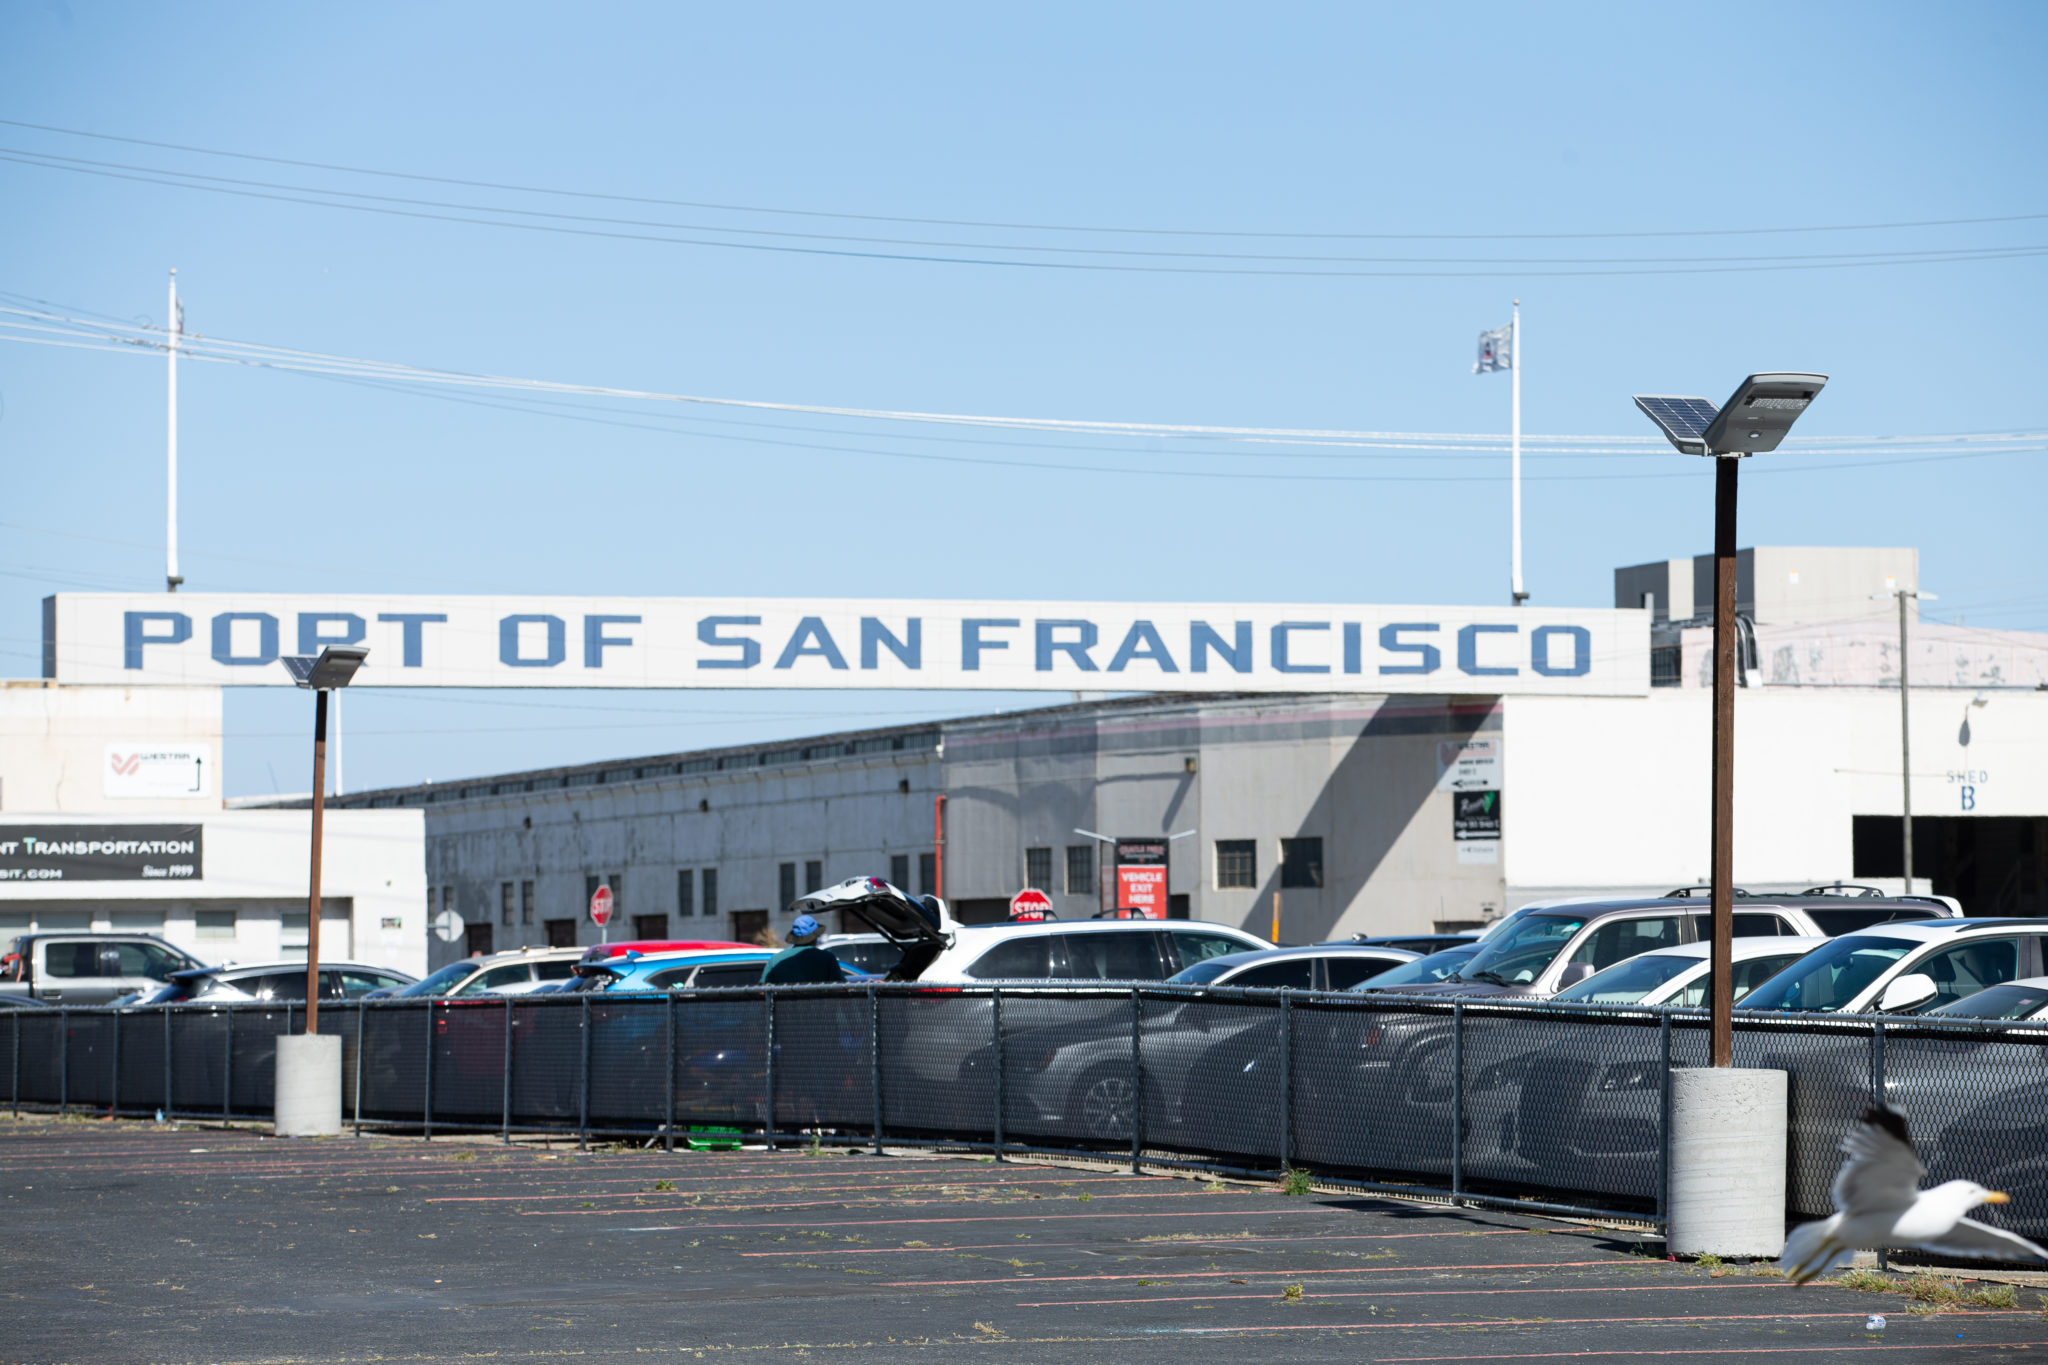 Port of San Francisco Parking Lot and SOLTECH SUNLIKE 30W fixtures photo